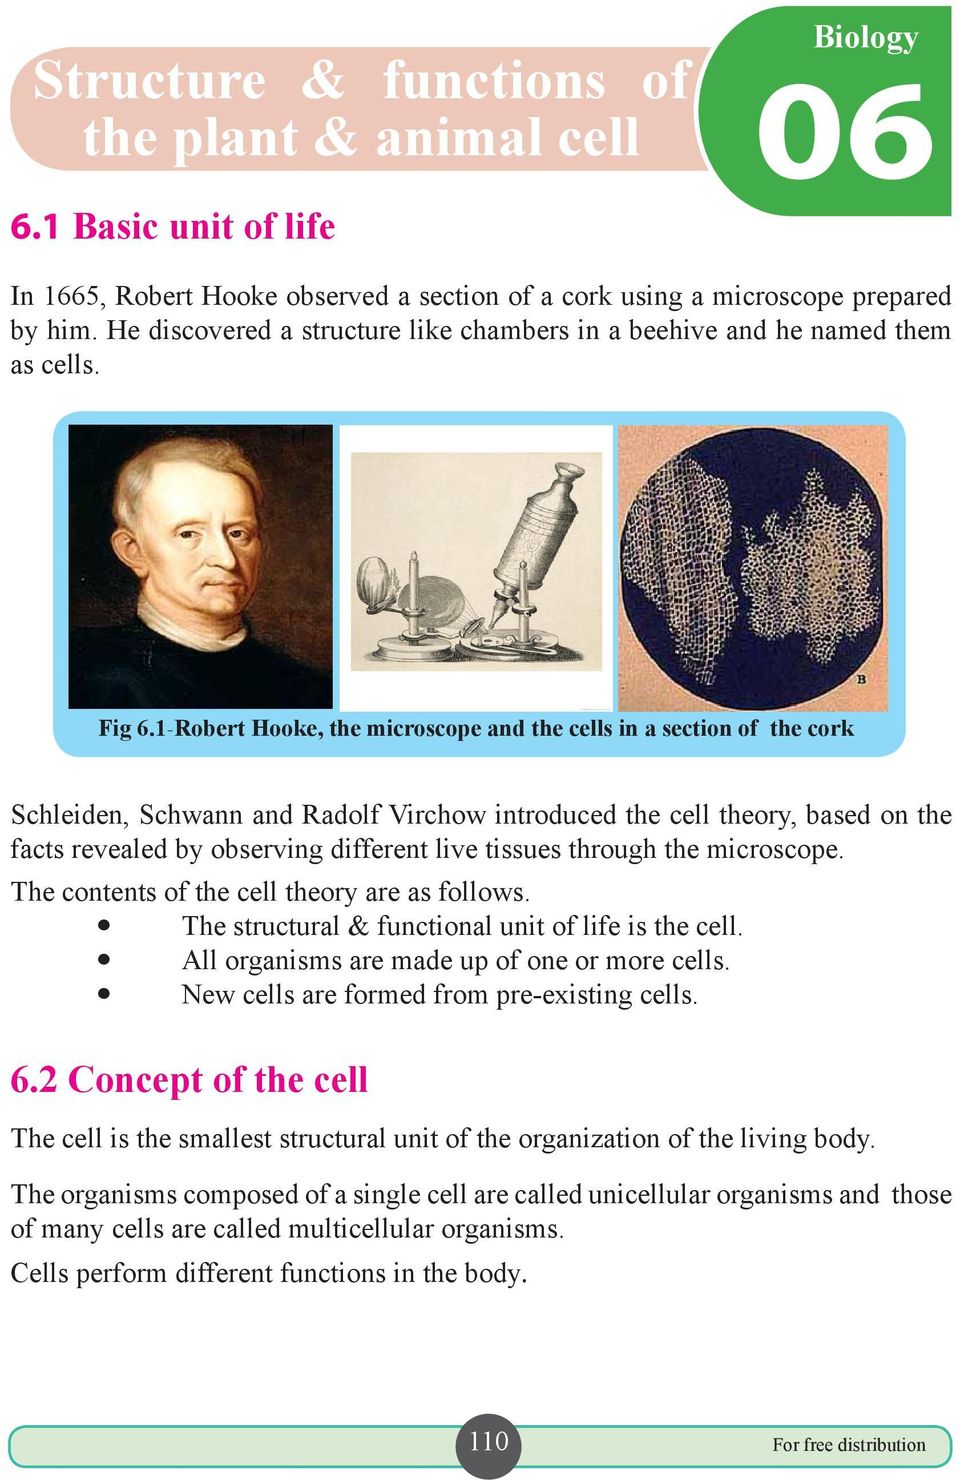 1-Robert Hooke, the microscope and the cells in a section of the cork Schleiden, Schwann and Radolf Virchow introduced the cell theory, based on the facts revealed by observing different live tissues